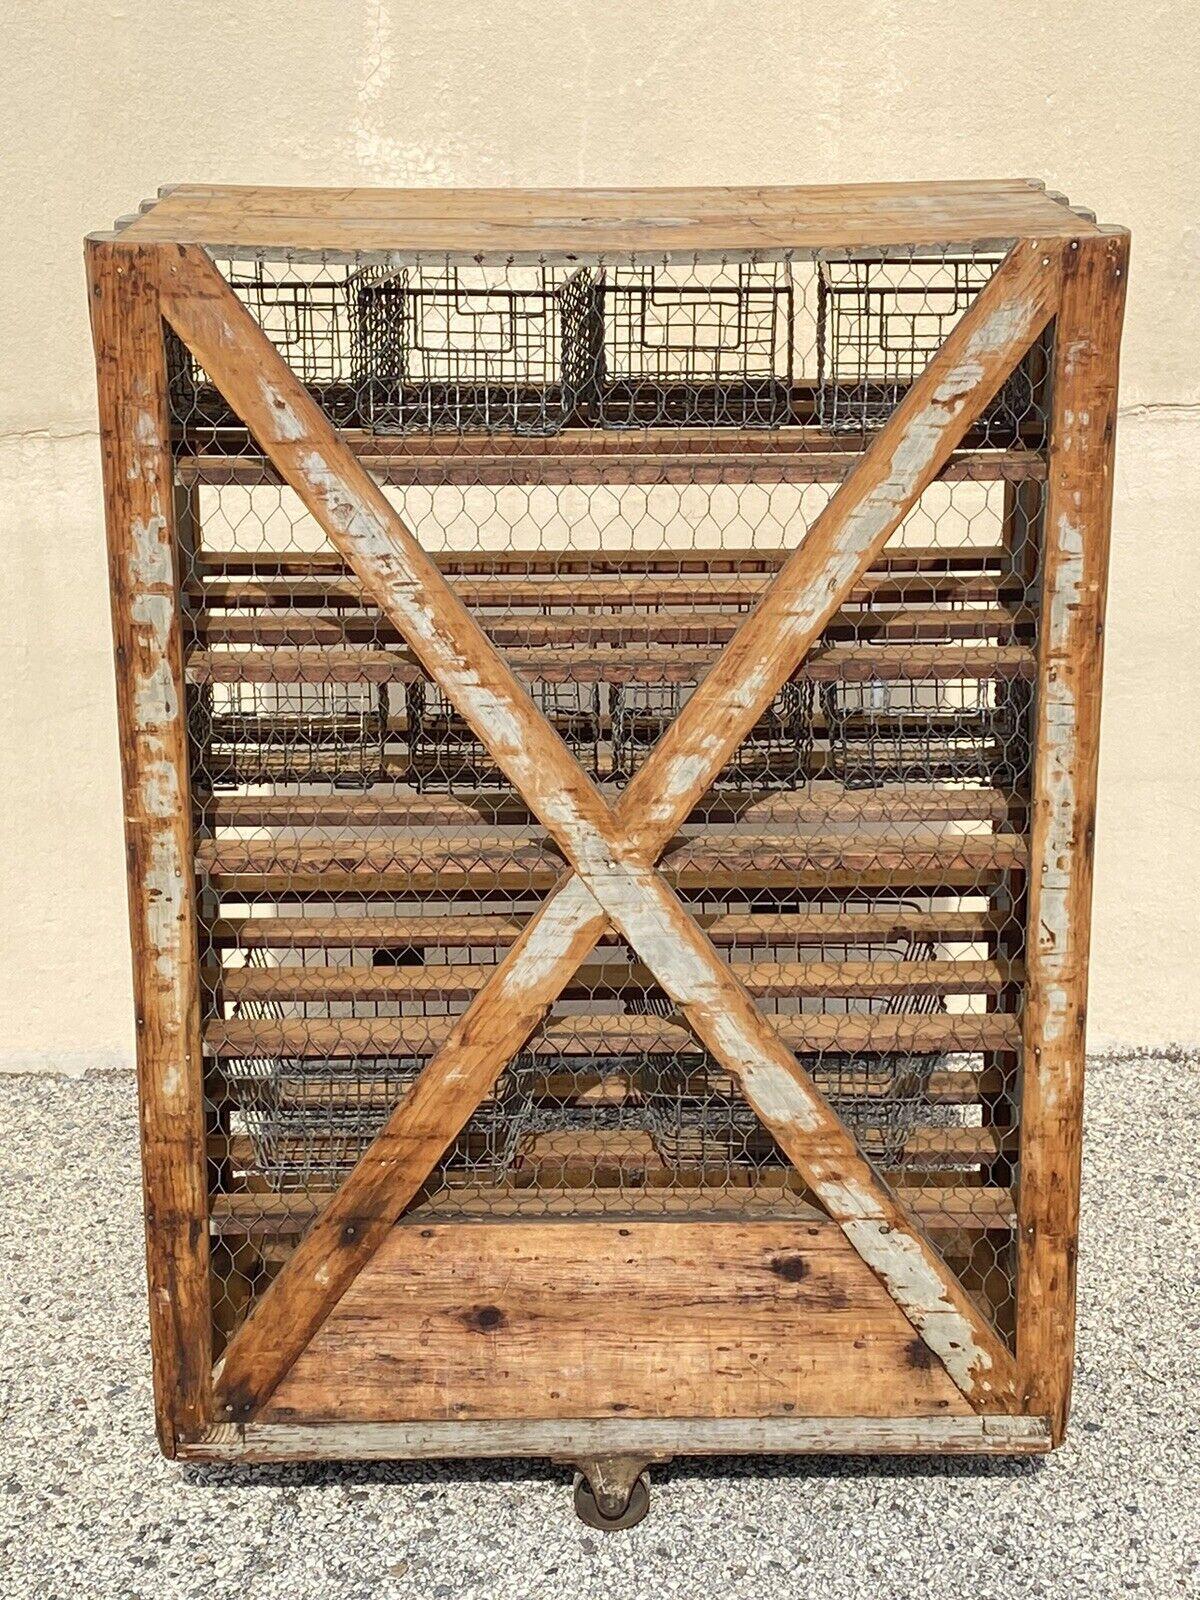 Antique American Industrial Wooden Rolling Shelf Storage Cart Distressed Gray For Sale 1